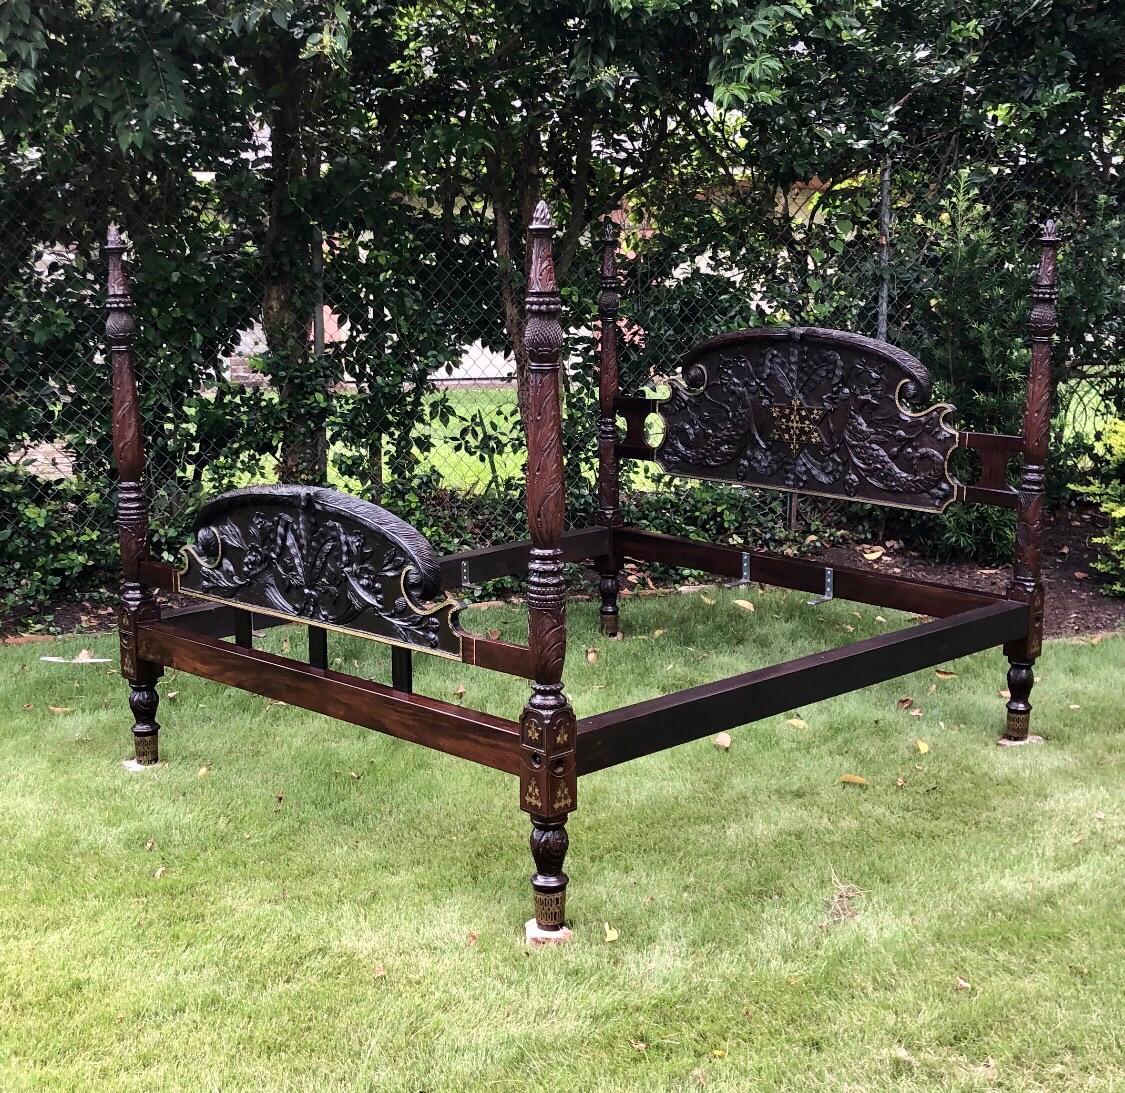 This elegant Caribbean mahogany bed was constructed in the 19th century. This rare West Indies Bedstead exhibits a scarce and desirable hand carved headboard and footboard framed in pierced brass inlay. The headboard is finely carved with a